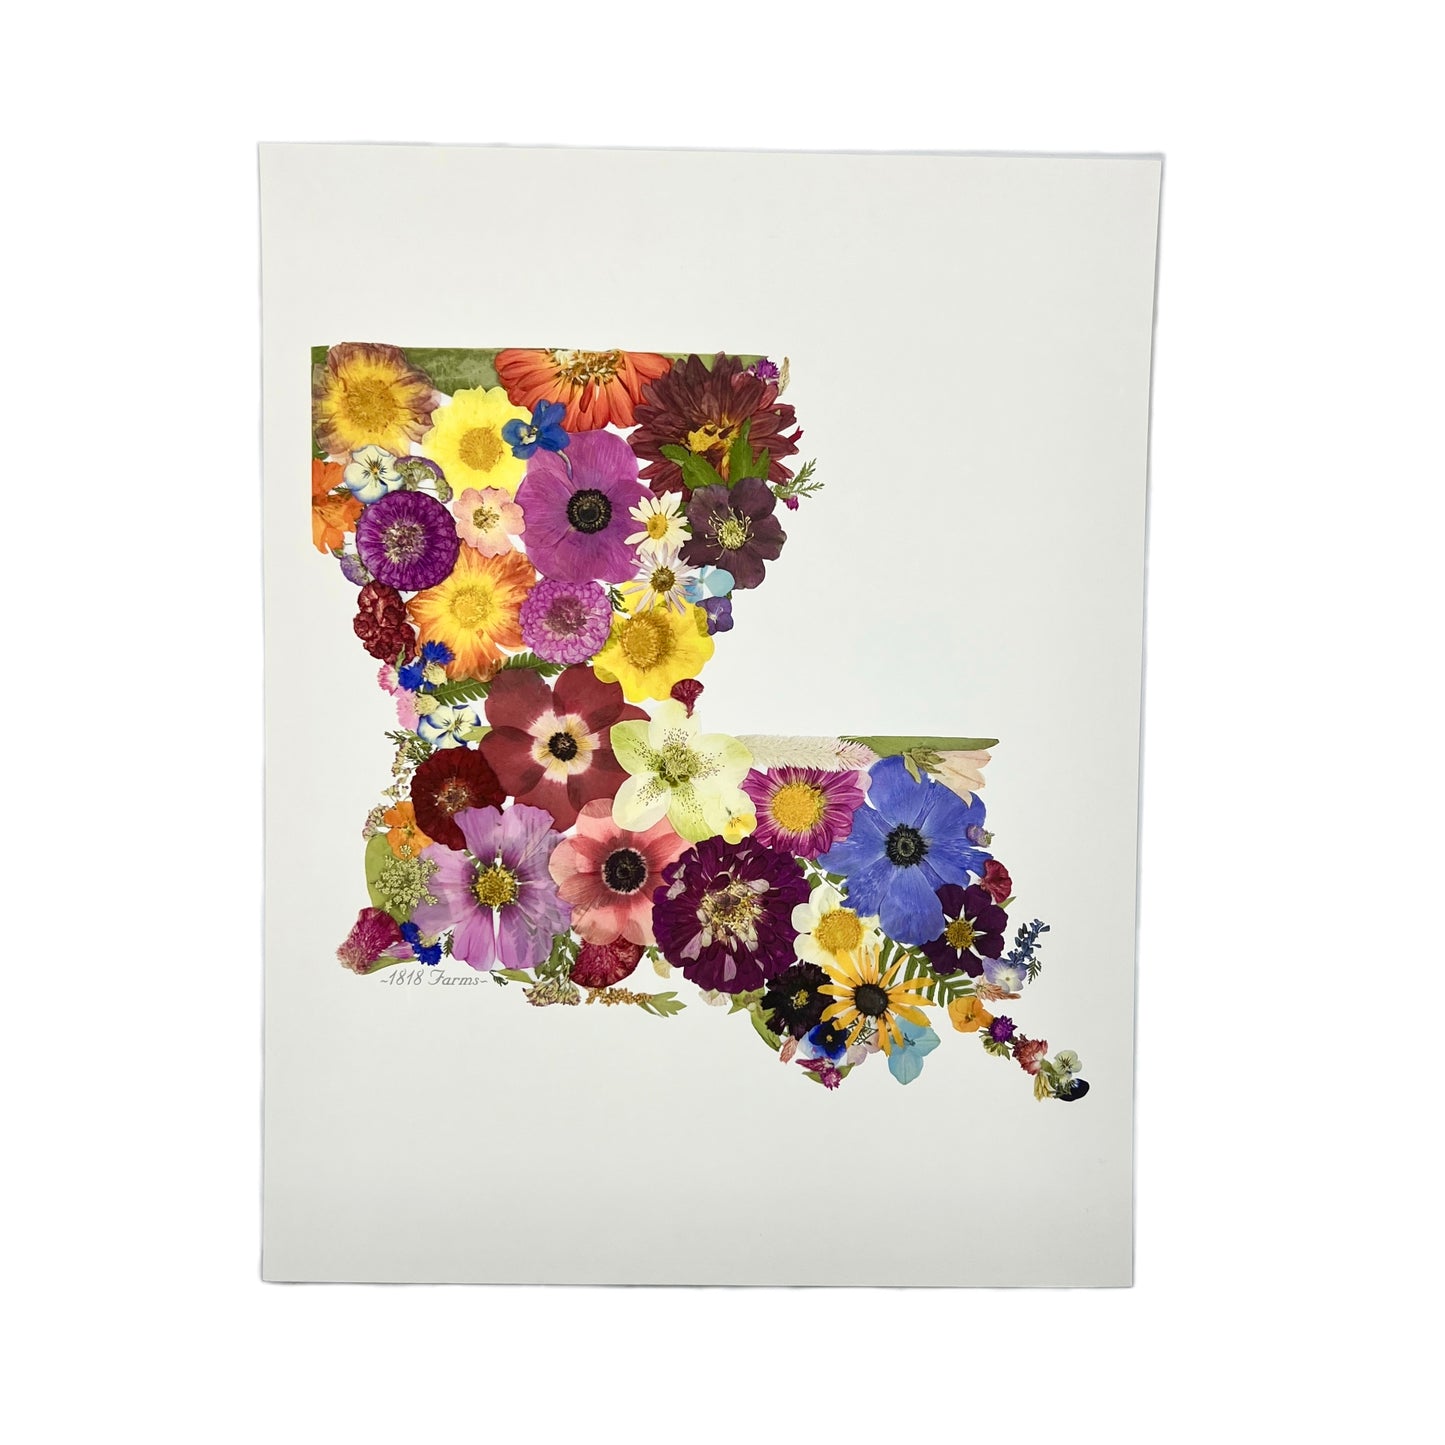 Louisiana Themed Giclée Print Featuring Dried, Pressed Flowers - "Where I Bloom" Collection Giclee Art Print 1818 Farms   